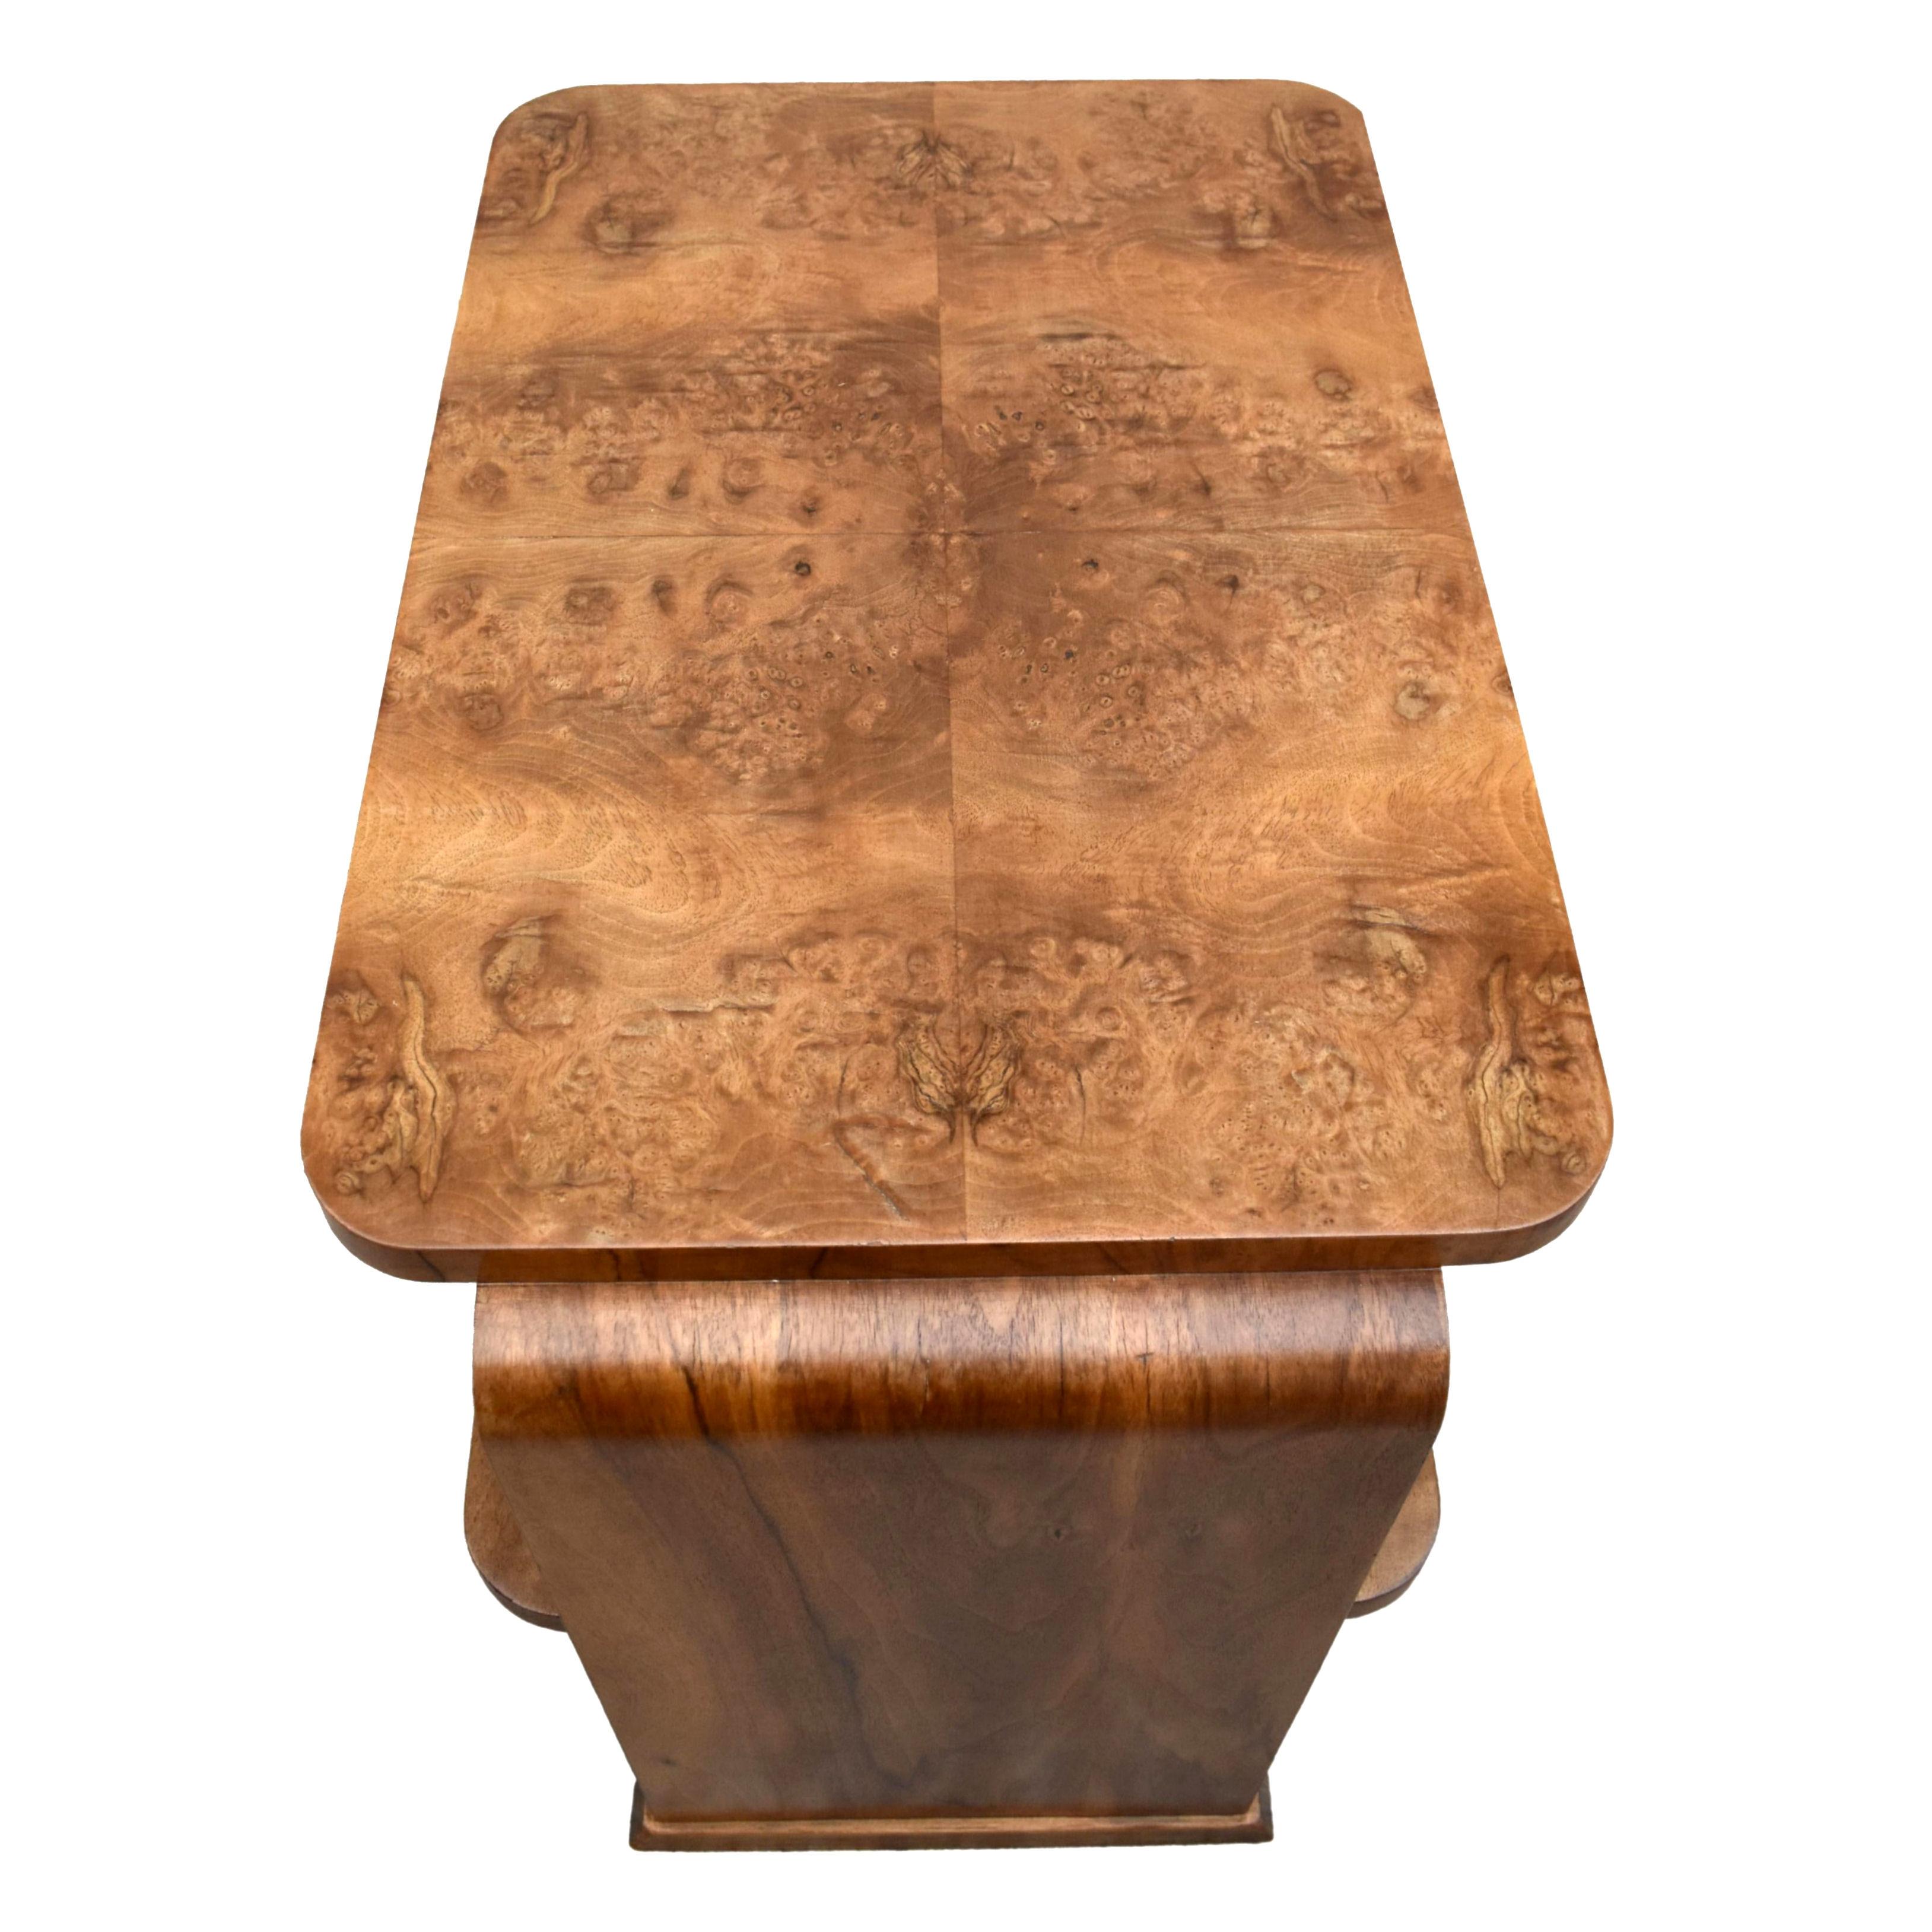 Art Deco Large Modernist Two Tier Blonde Walnut Occasional Table, circa 1930 For Sale 1